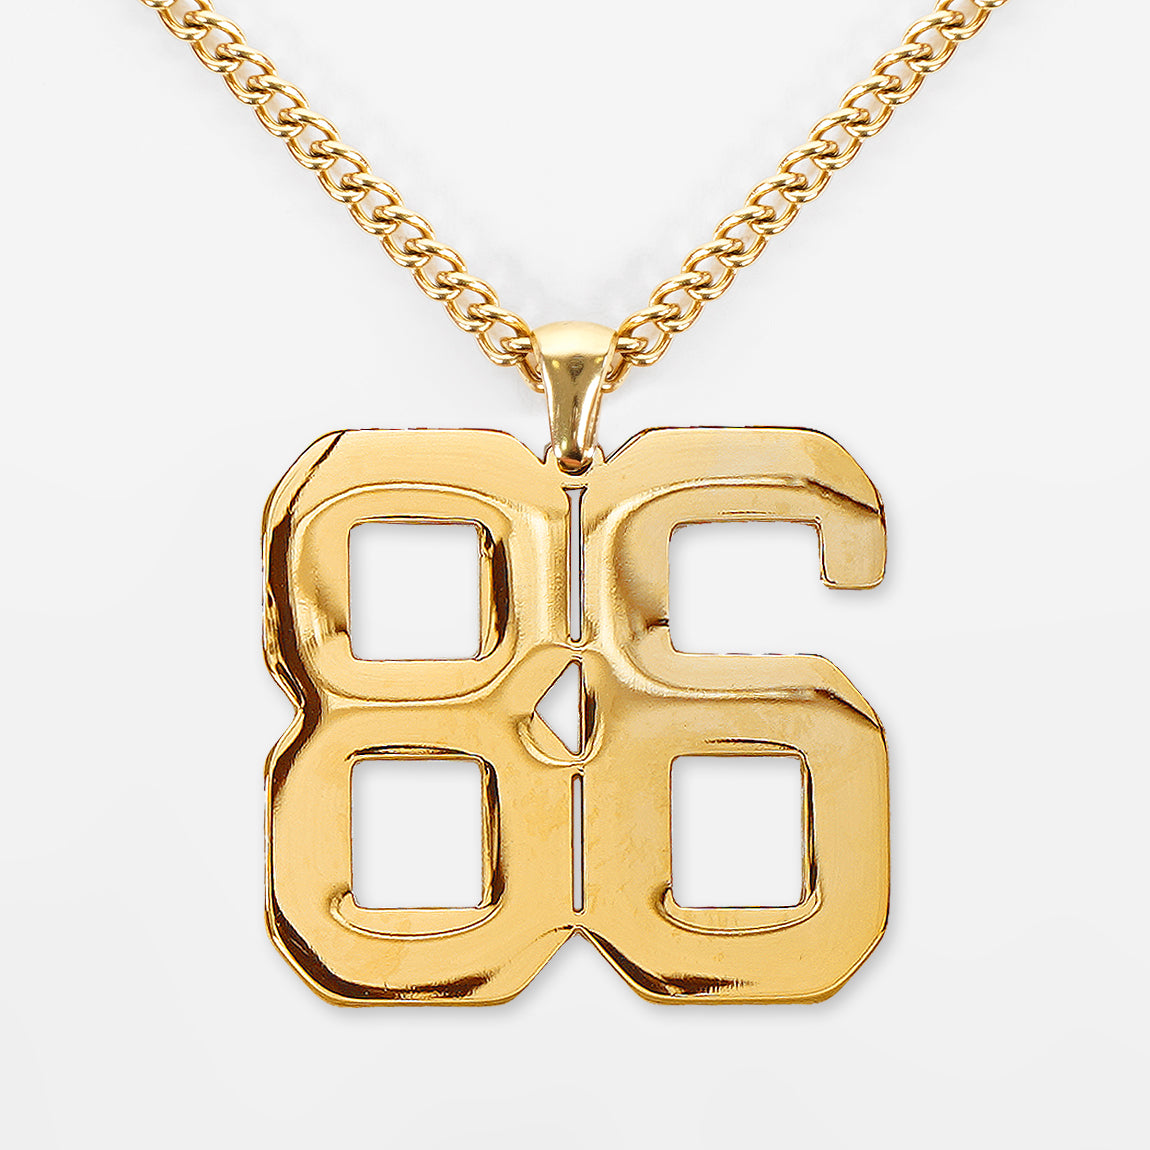 86 Number Pendant with Chain Necklace - Gold Plated Stainless Steel